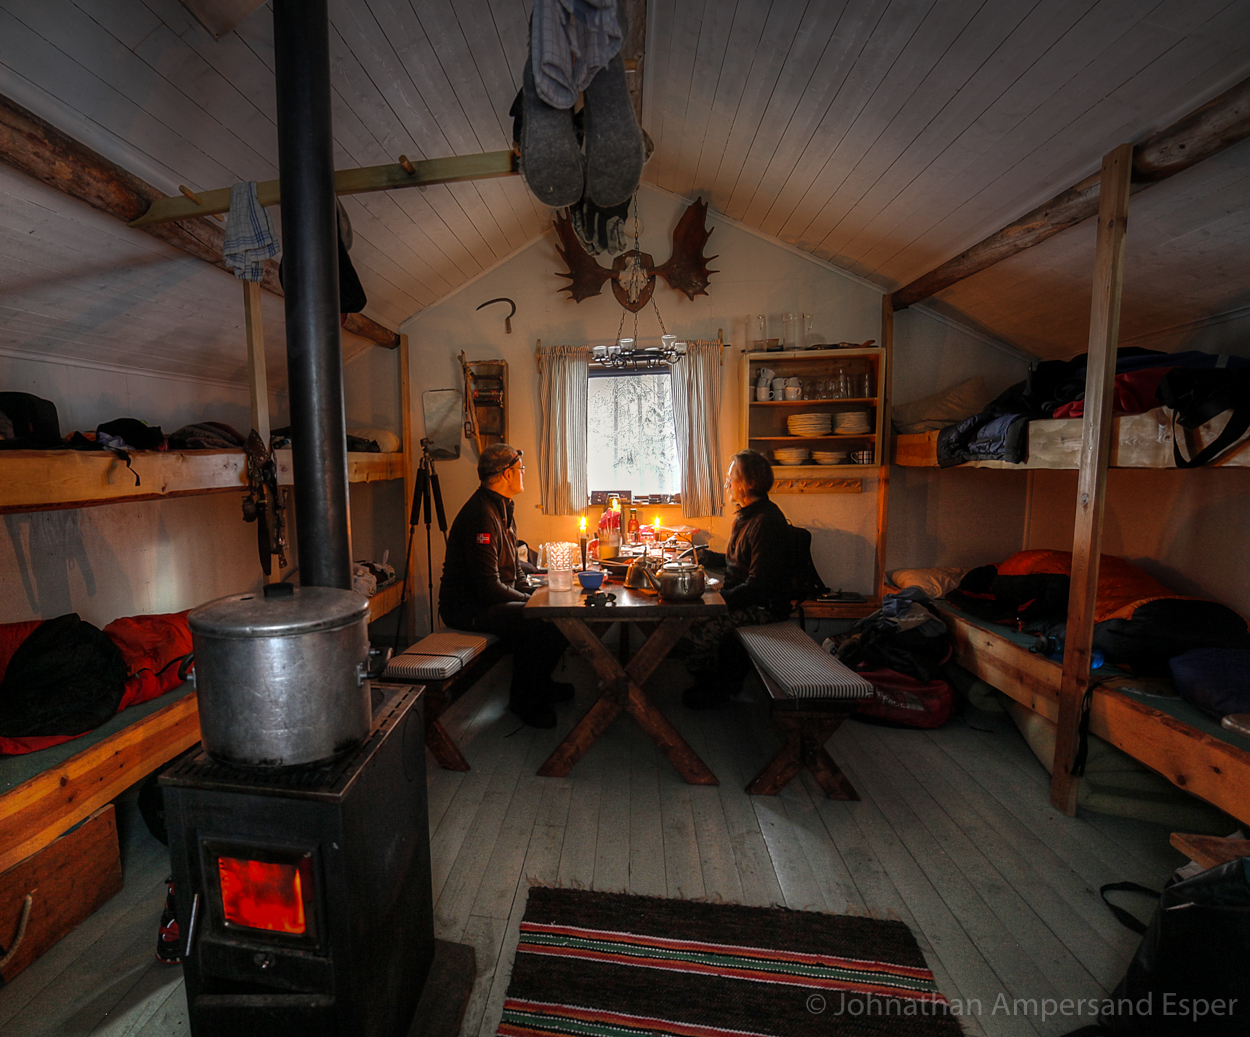 Dinner in a warm cabin in Sweden. Captured on a 10 day dogsledding trip in -30 to -20 degree C temperatures near Kiruna, Sweden...